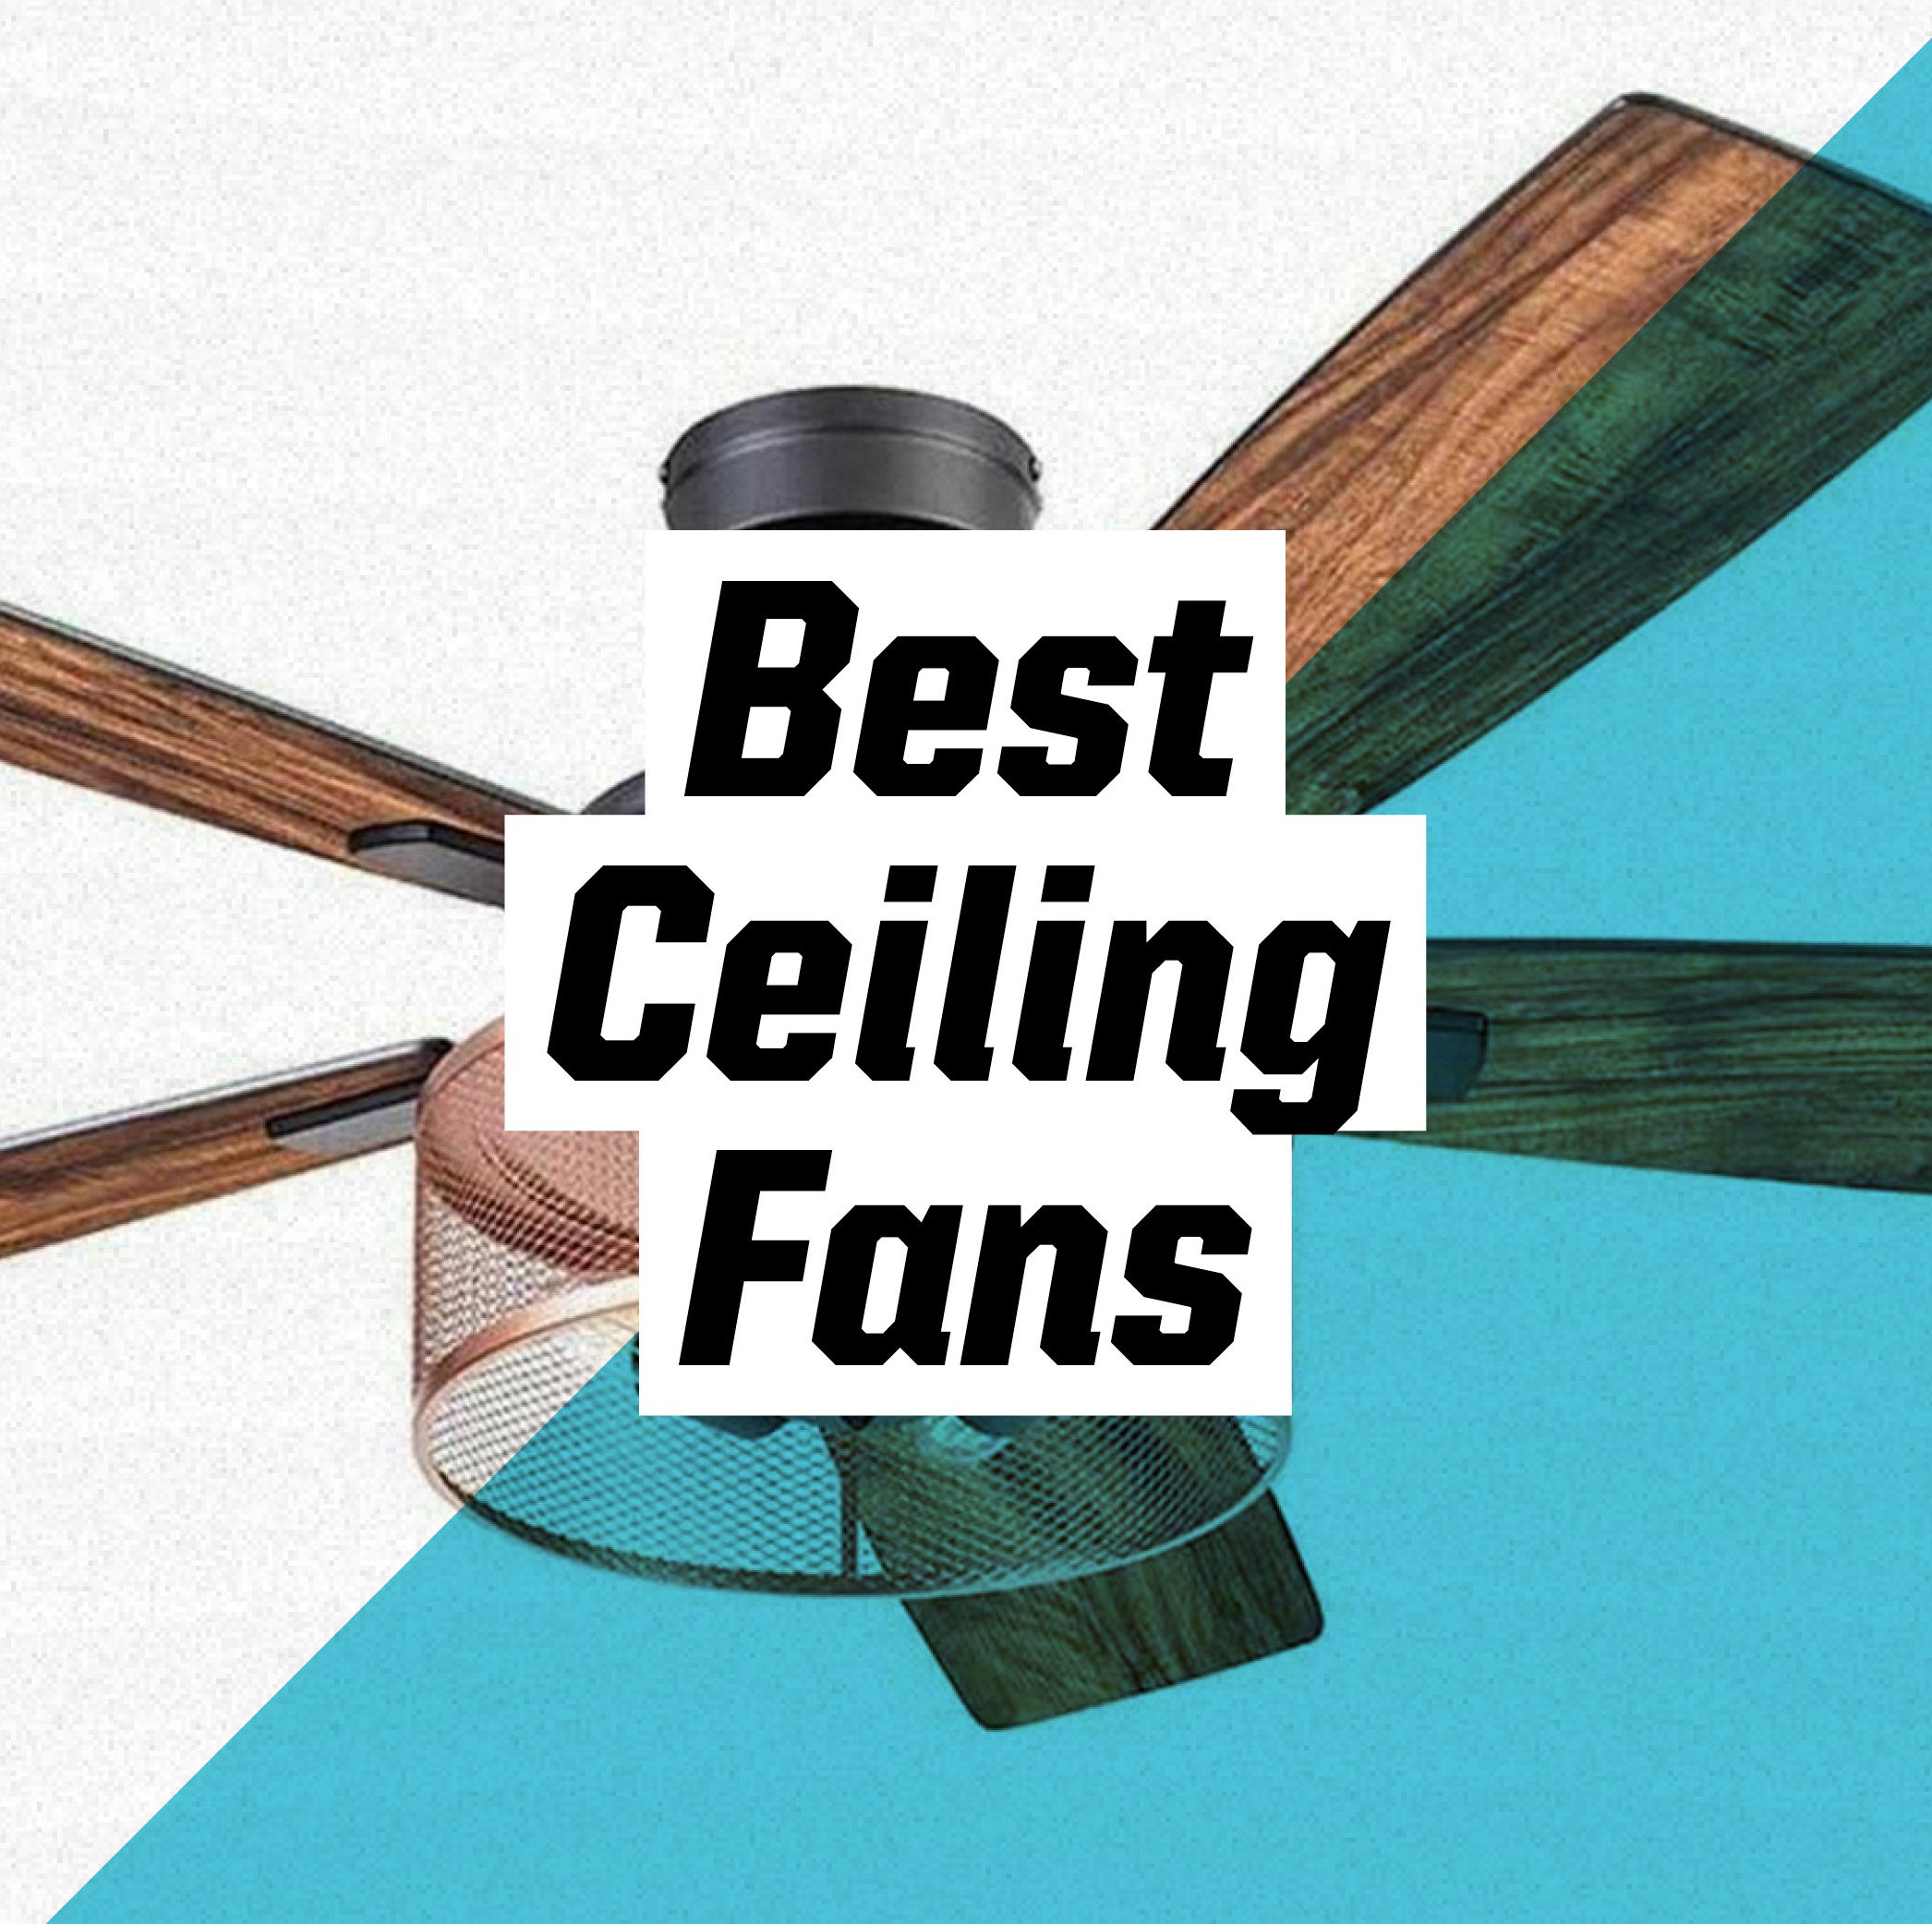 The 7 Best Ceiling Fans for Silent, Powerful Airflow